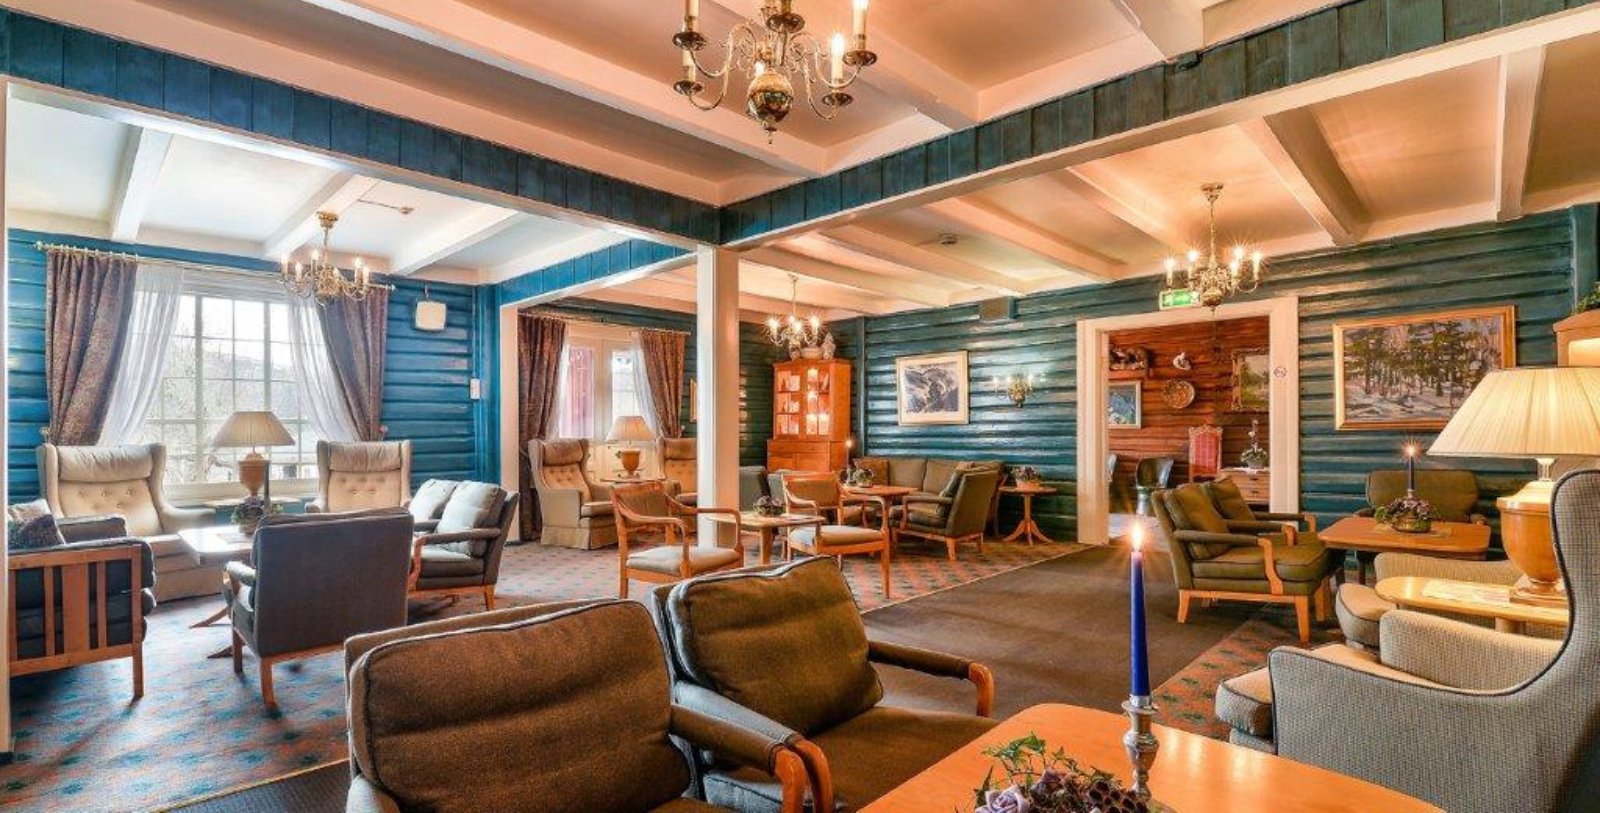 Image of common area at Straand Hotel, 1864, Member of Historic Hotels Worldwide since 2023, in Vrådal, Norway